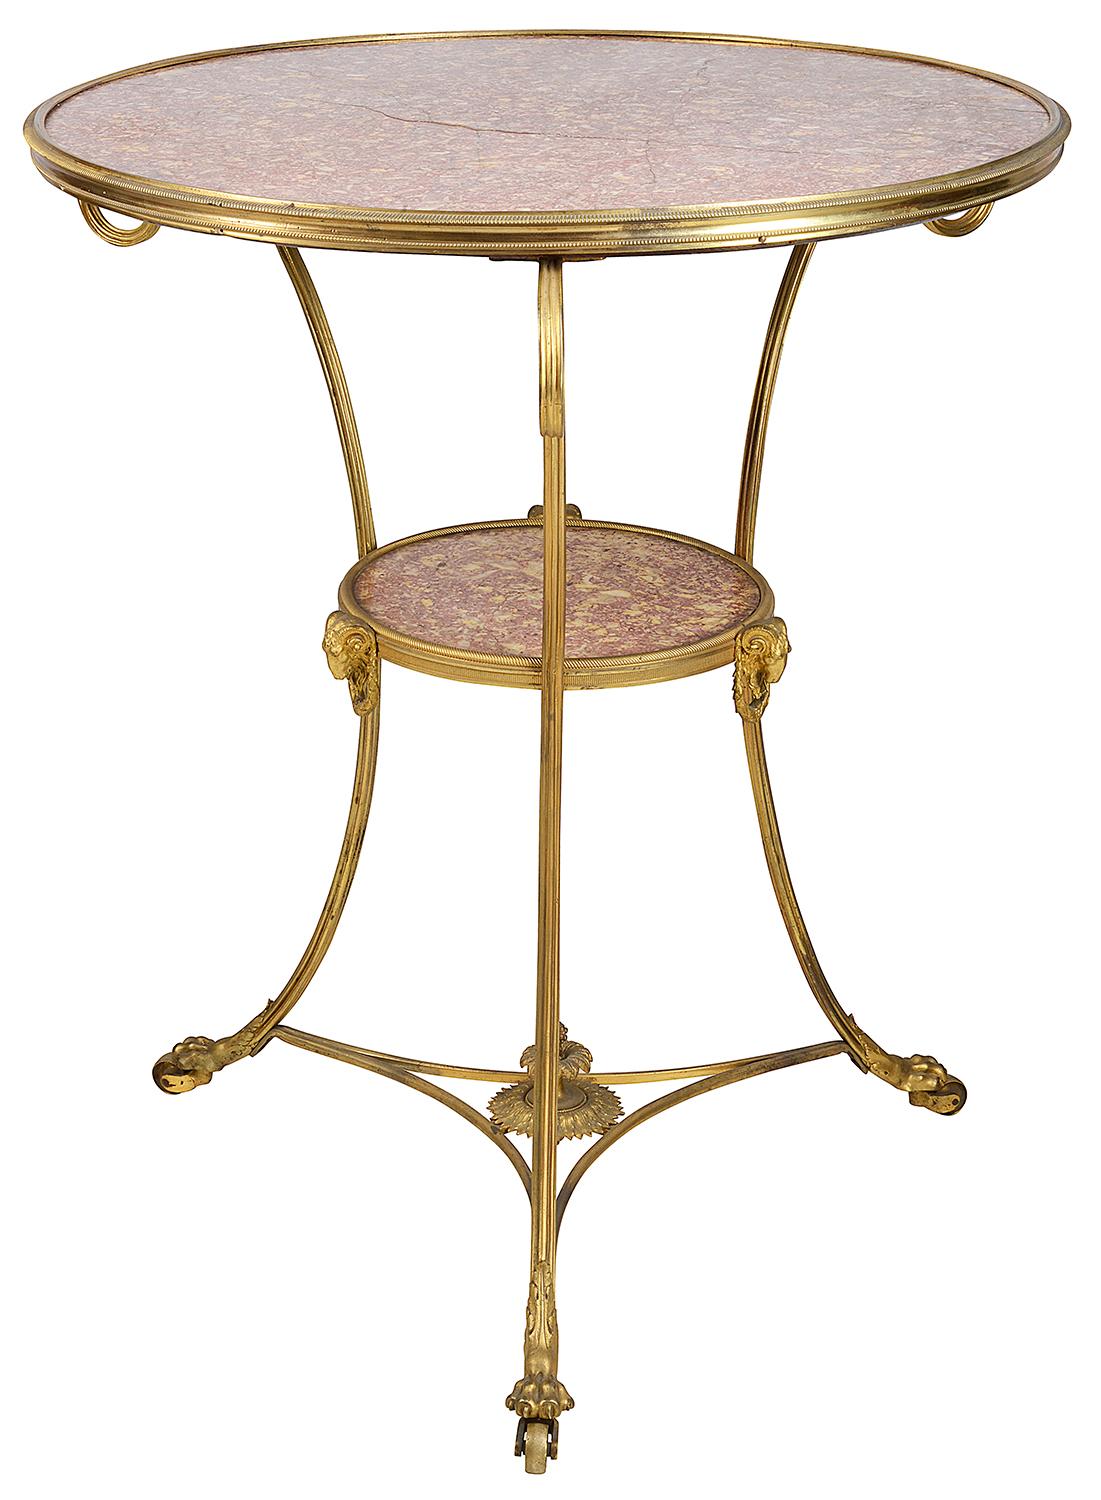 A very elegant late 19th century French gilded ormolu Gueridon, having a wonderful inset Rosa marble top, three scrolling out swept supports, an under tier also with a matching inset marble, Rams head and wreath mounts, terminating in classical claw